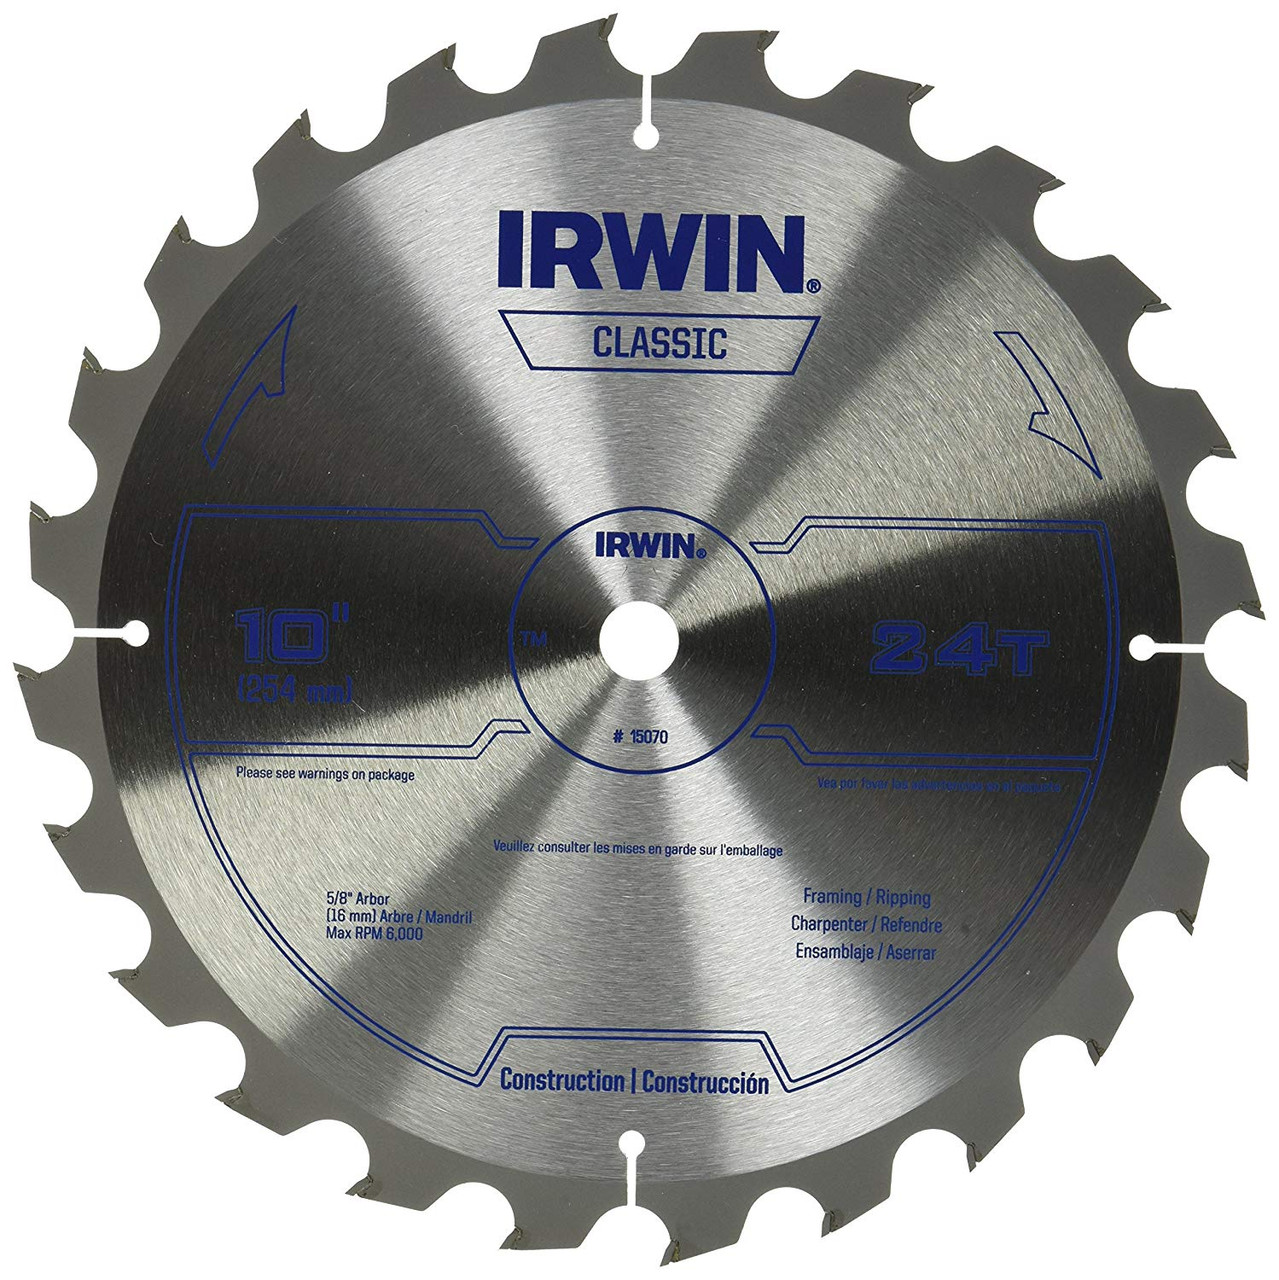 IRWIN Tools Classic Series Carbide Table/Miter Circular Saw Blades, 10-Inch, 24T (15070)